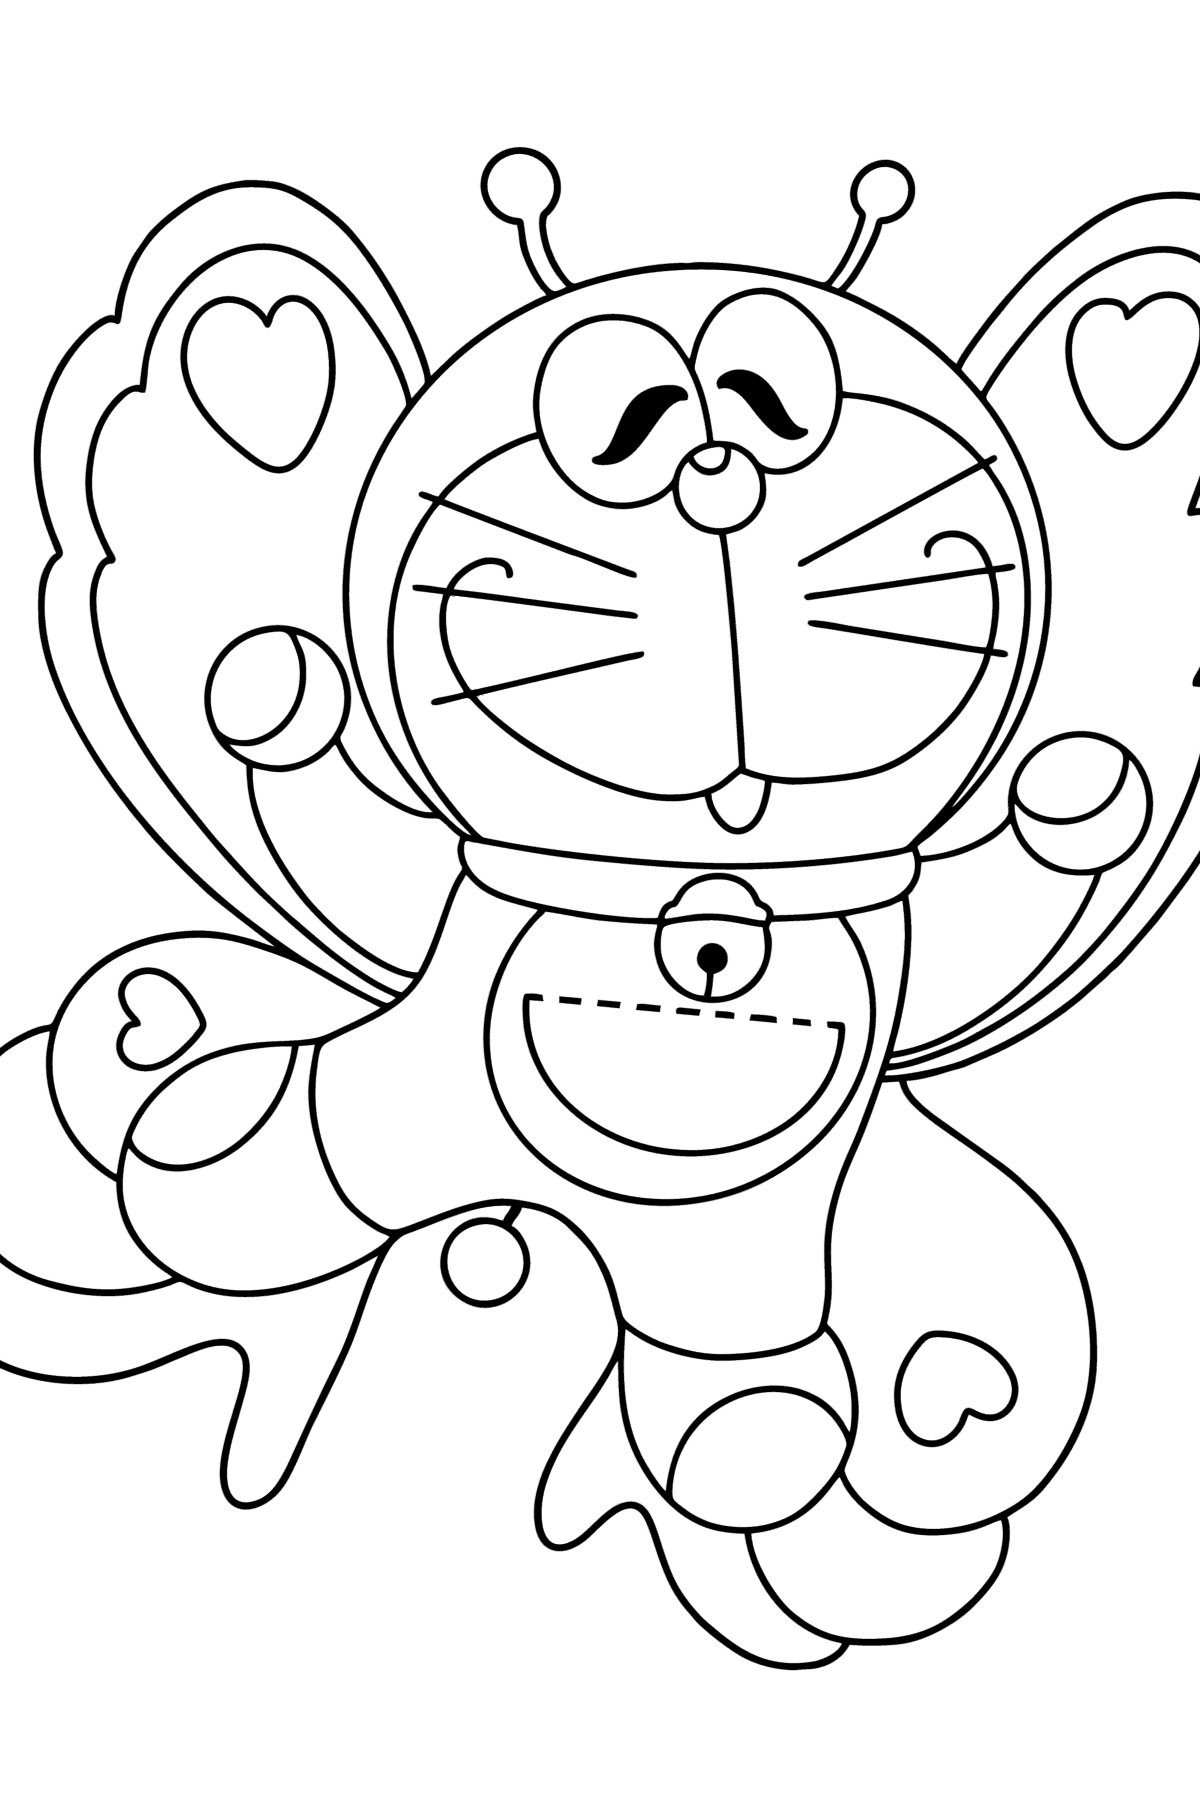 Doraemon Butterfly сolouring page - Coloring Pages for Kids